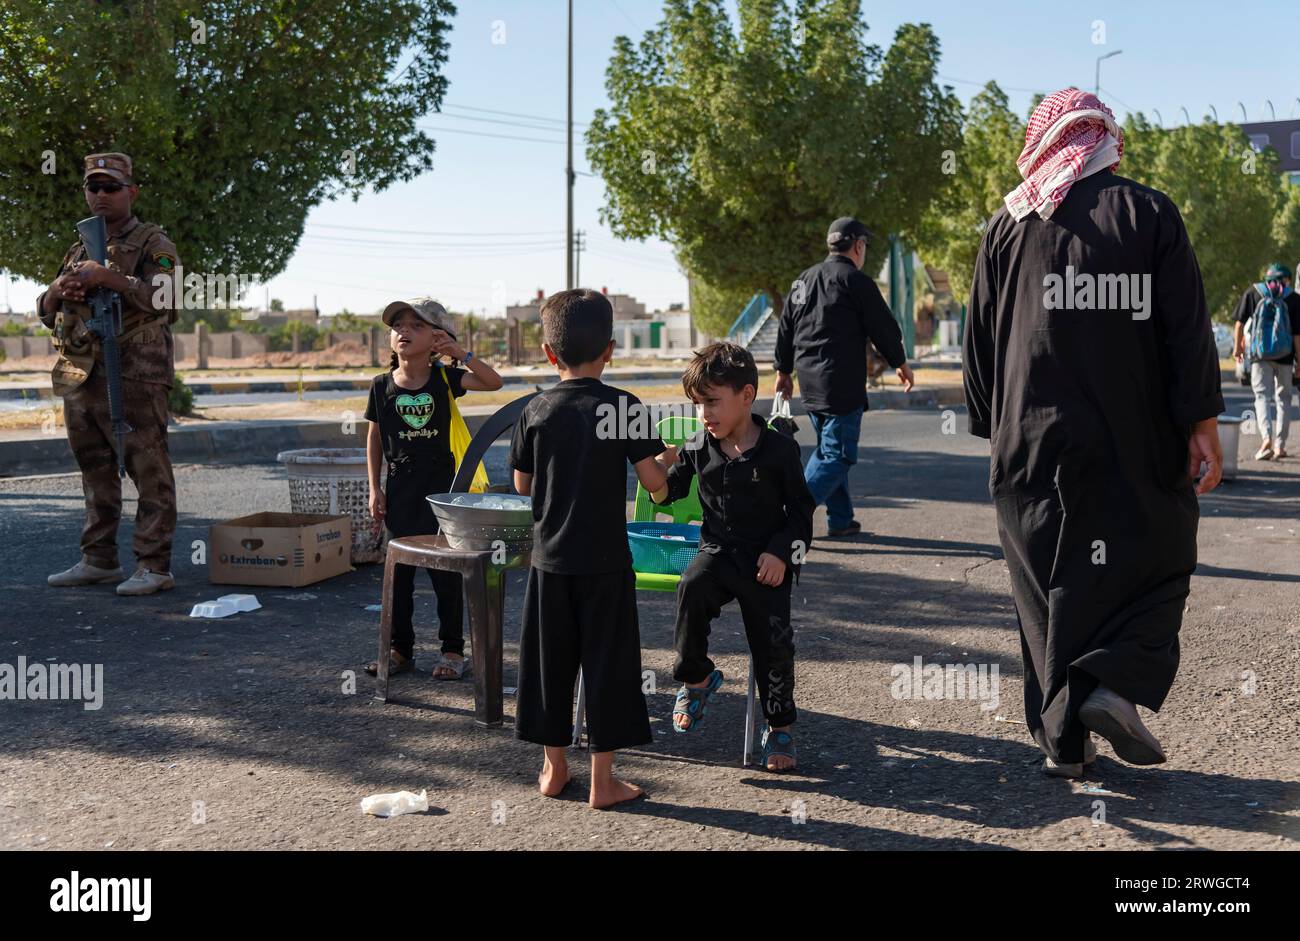 Iraqi Shia kids distribute water among Shia Muslim pilgrims marching from Najaf towards Shrine city of Karbala. Every year, millions of Shia Muslims and some from other faiths undertake a 20-day pilgrimage on foot from various cities in Iraq and Iran to the holy city of Karbala. This pilgrimage is in remembrance of Imam Hussein, the grandson of the Prophet Muhammad, who died in a battle in 680 AD. On the 40th day of mourning for Hussein, known as Arbaeen, pilgrims converge in Karbala to pay tribute at his shrine. Along the way, volunteers provide food, water, and shelter, and villagers open th Stock Photo